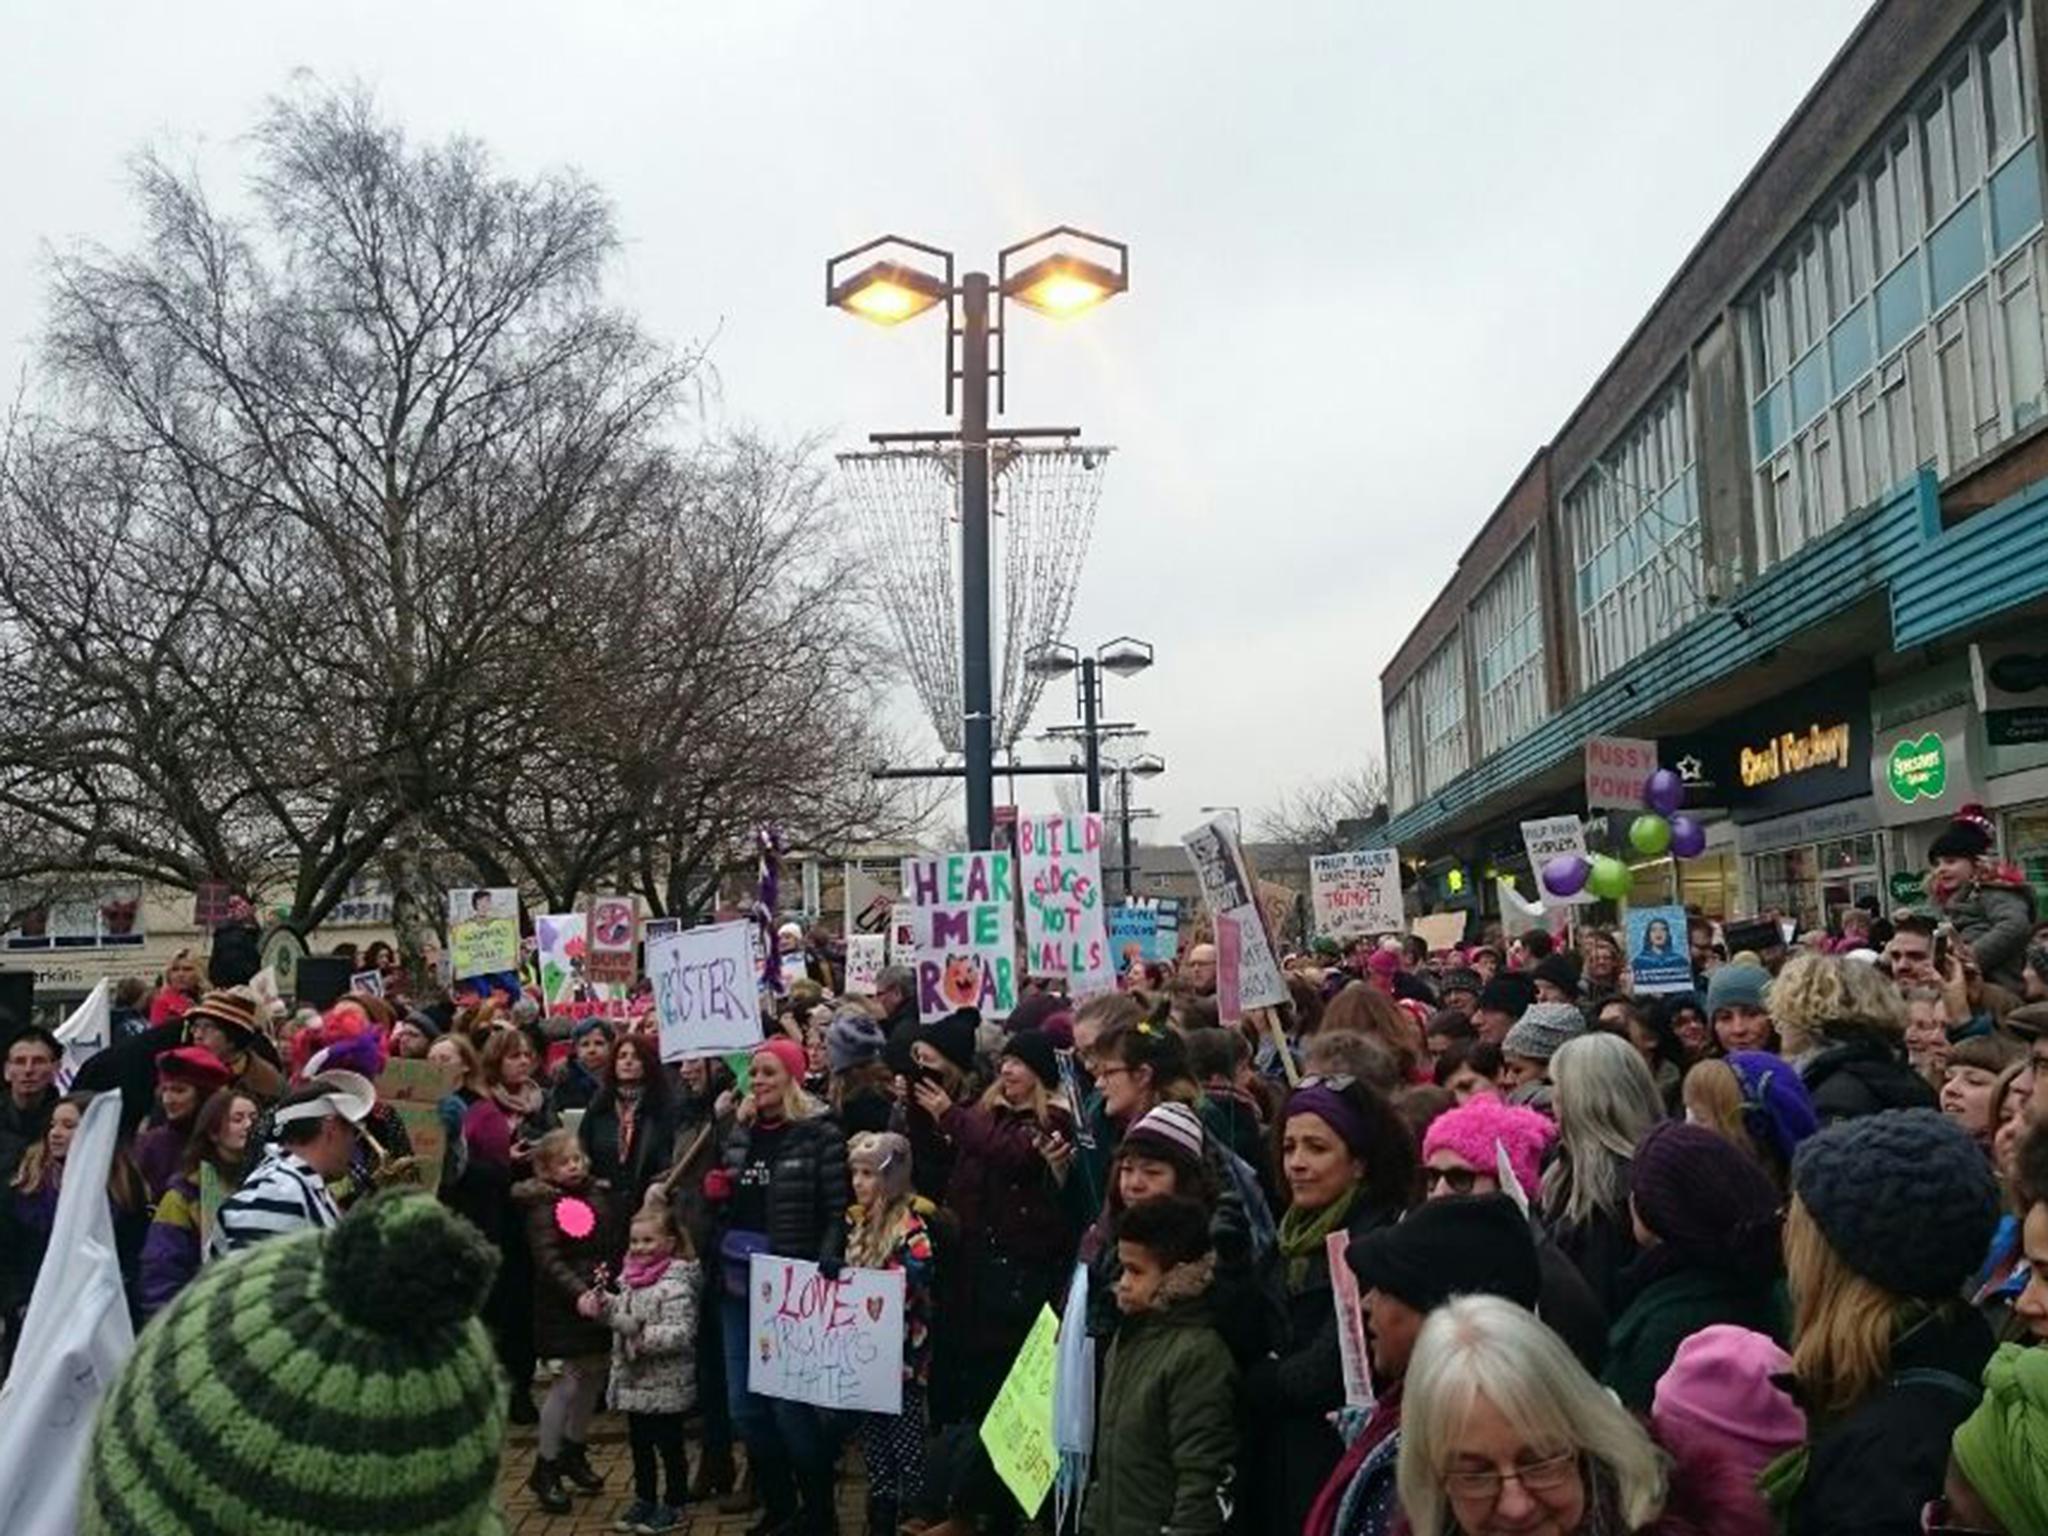 Over a thousand people gathered in Shipley in solidarity with others marching against Donald Trump